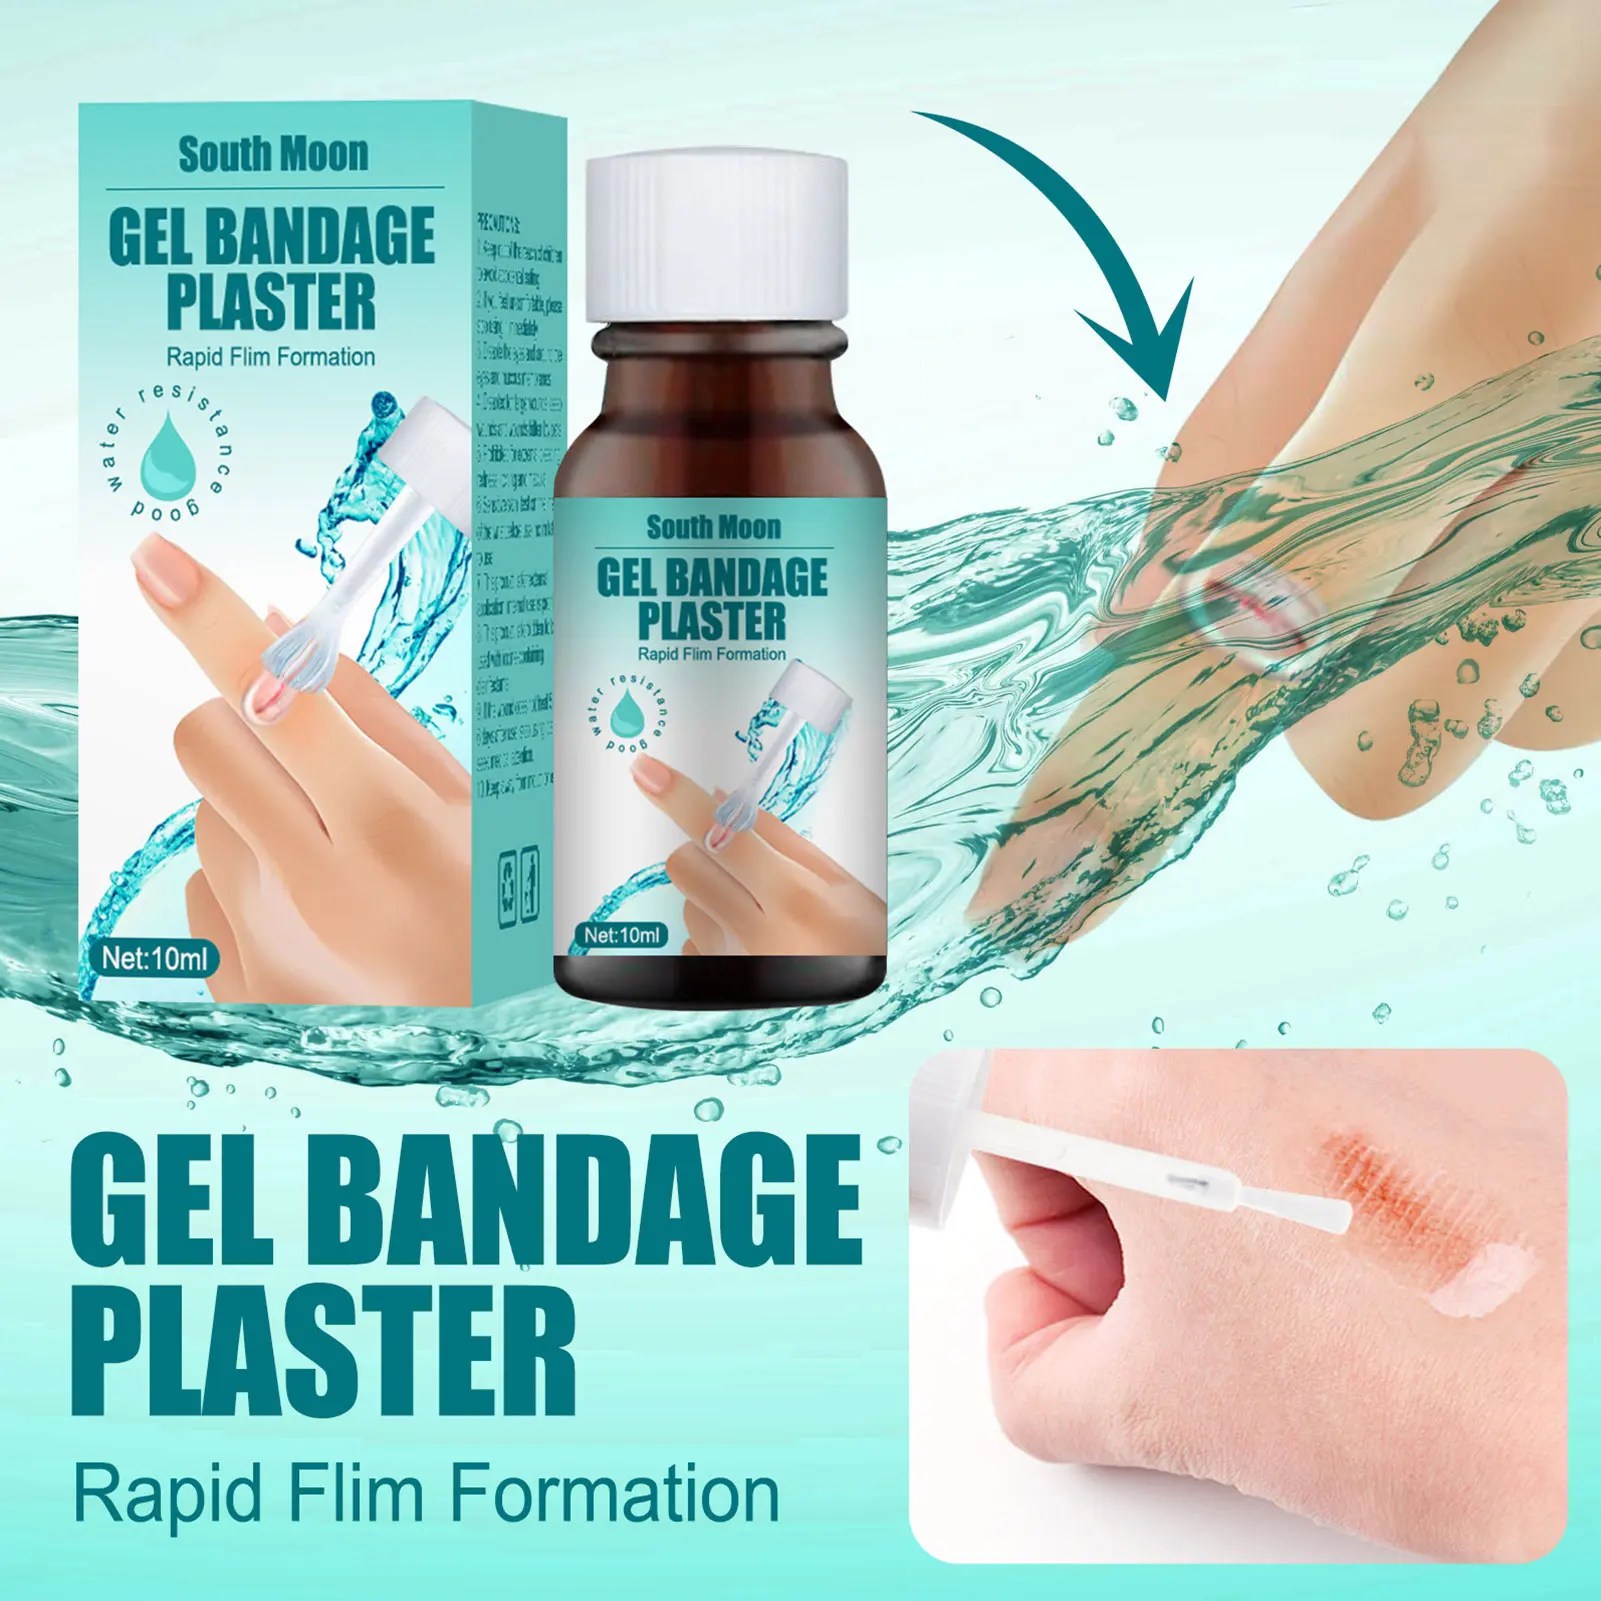 

10ml Liquid Bandage Breathable Quick-dry Gel Wound Care Bandage Waterproof Bandage Plaster For Minor Cuts Scrapes Wounds Dry